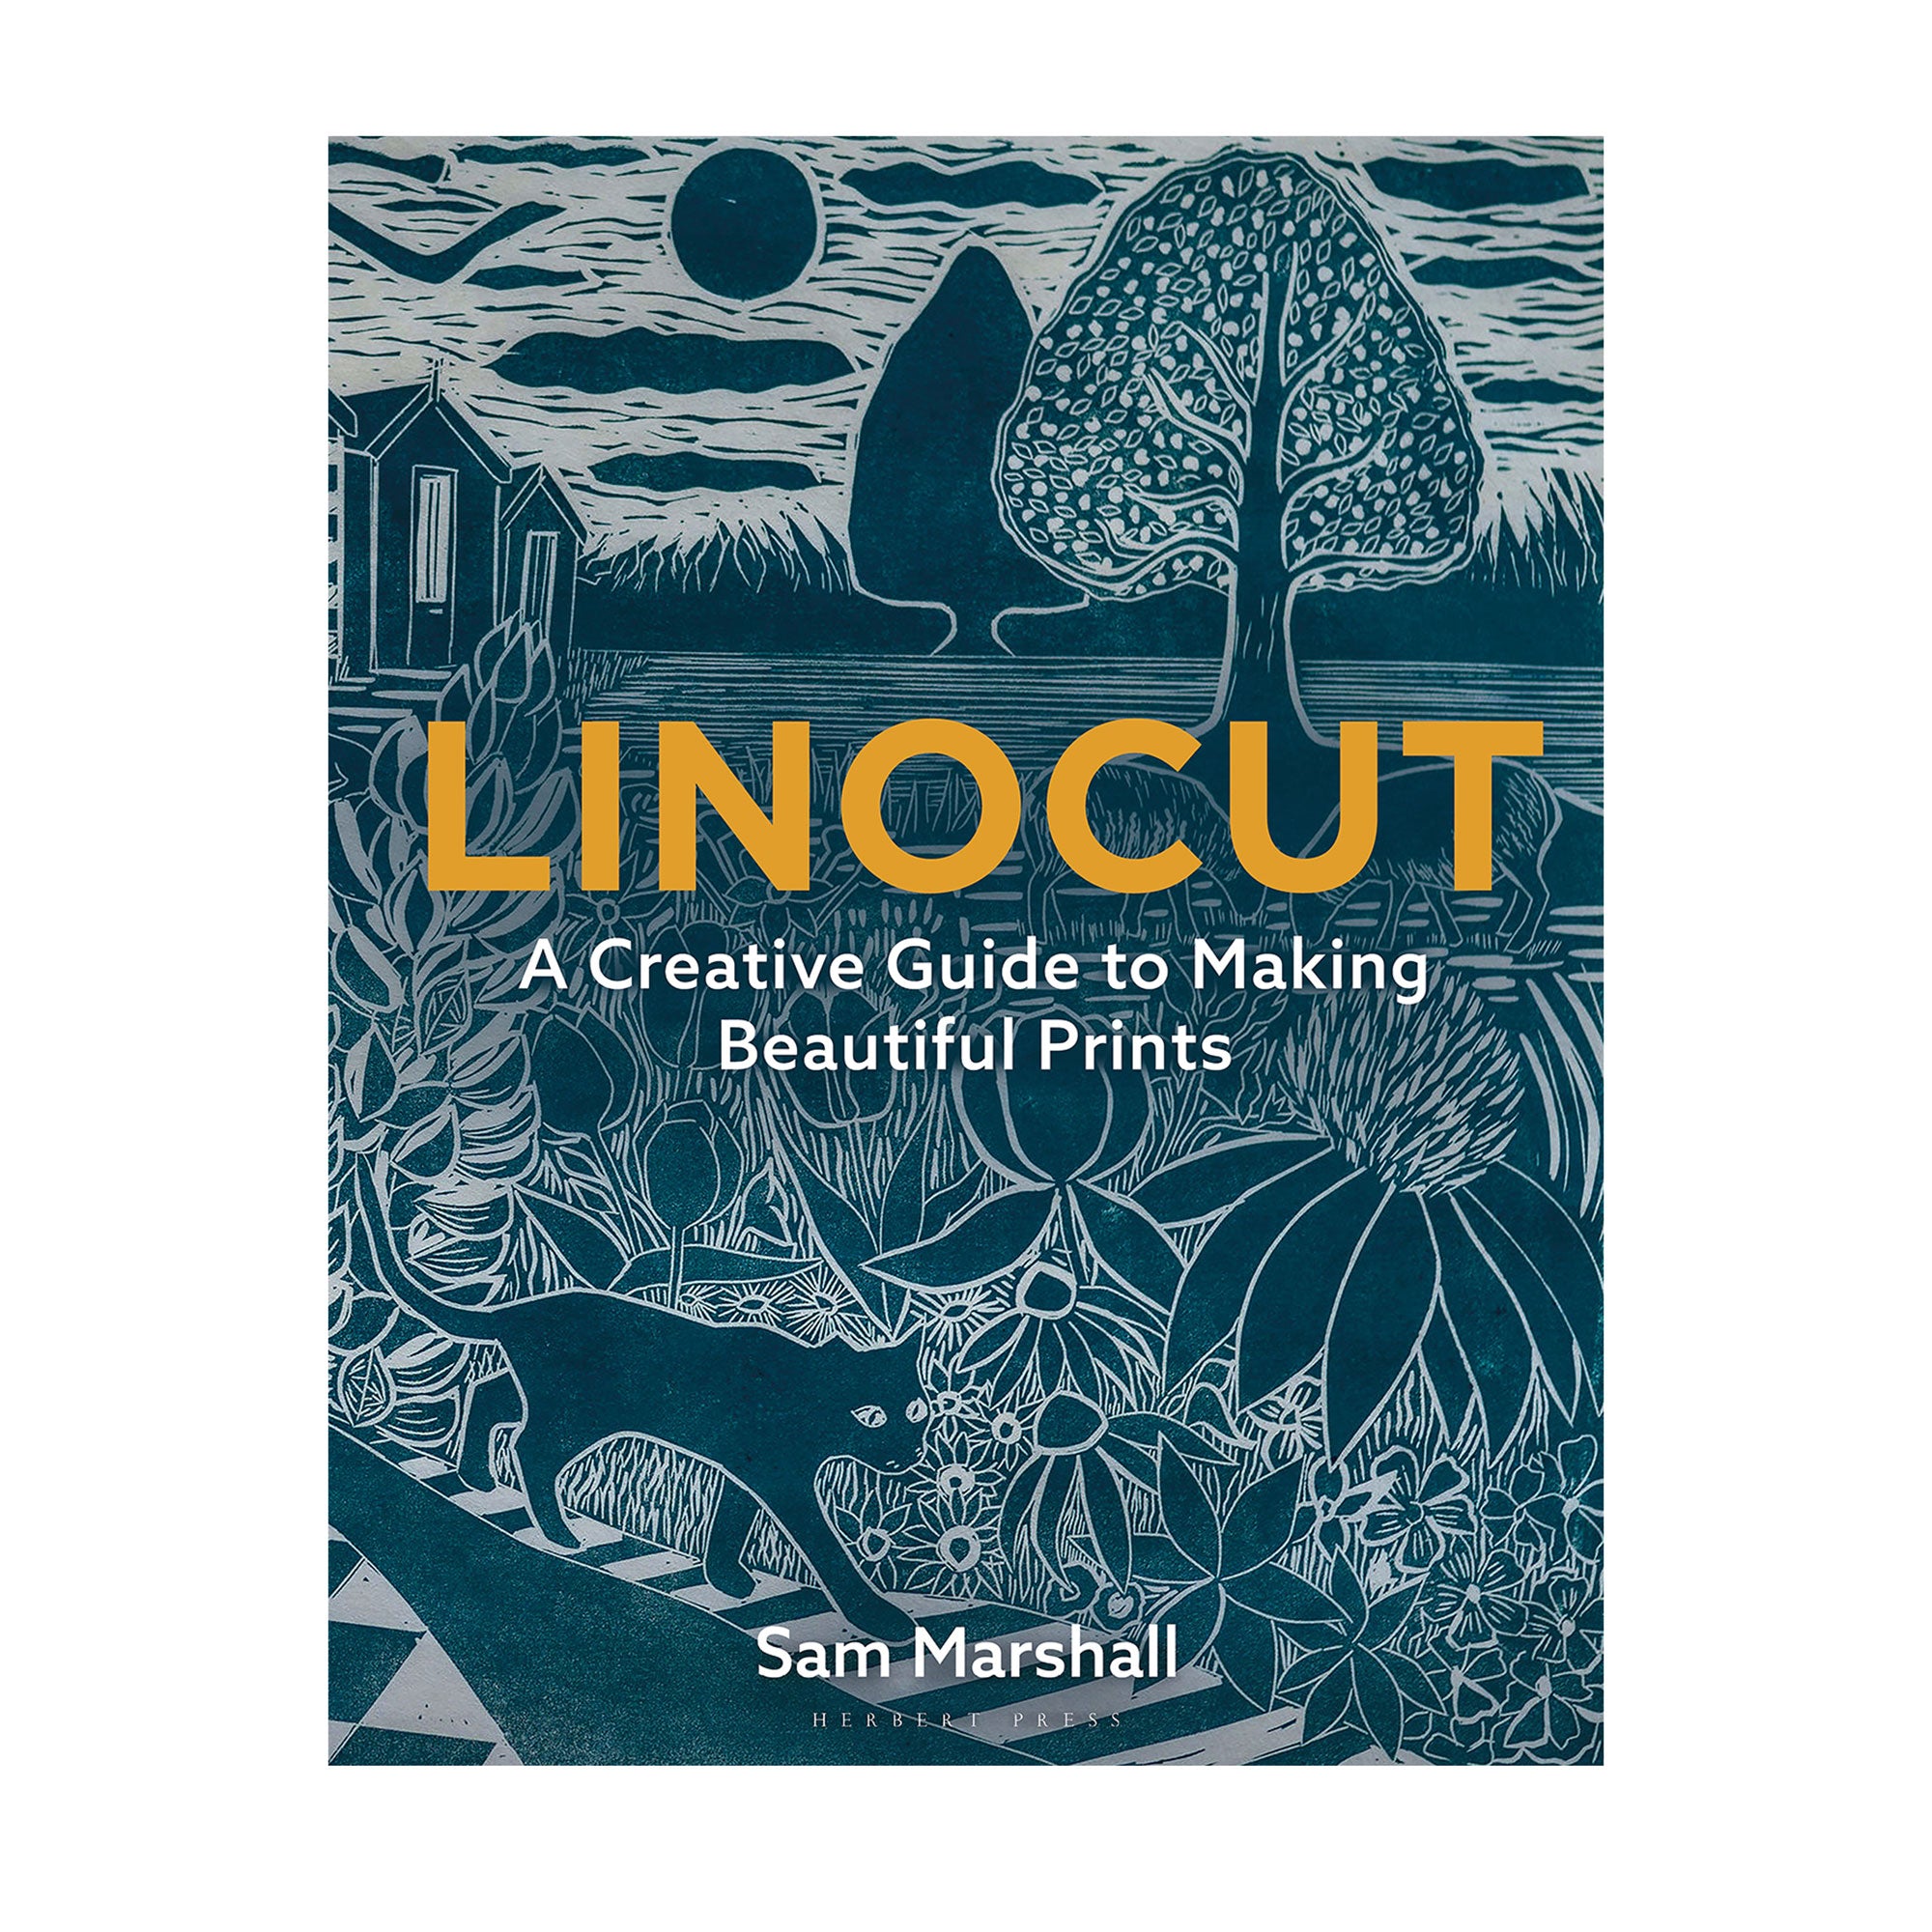 Linocut - A Creative Guide to Making Beautiful Prints - S. Marshall